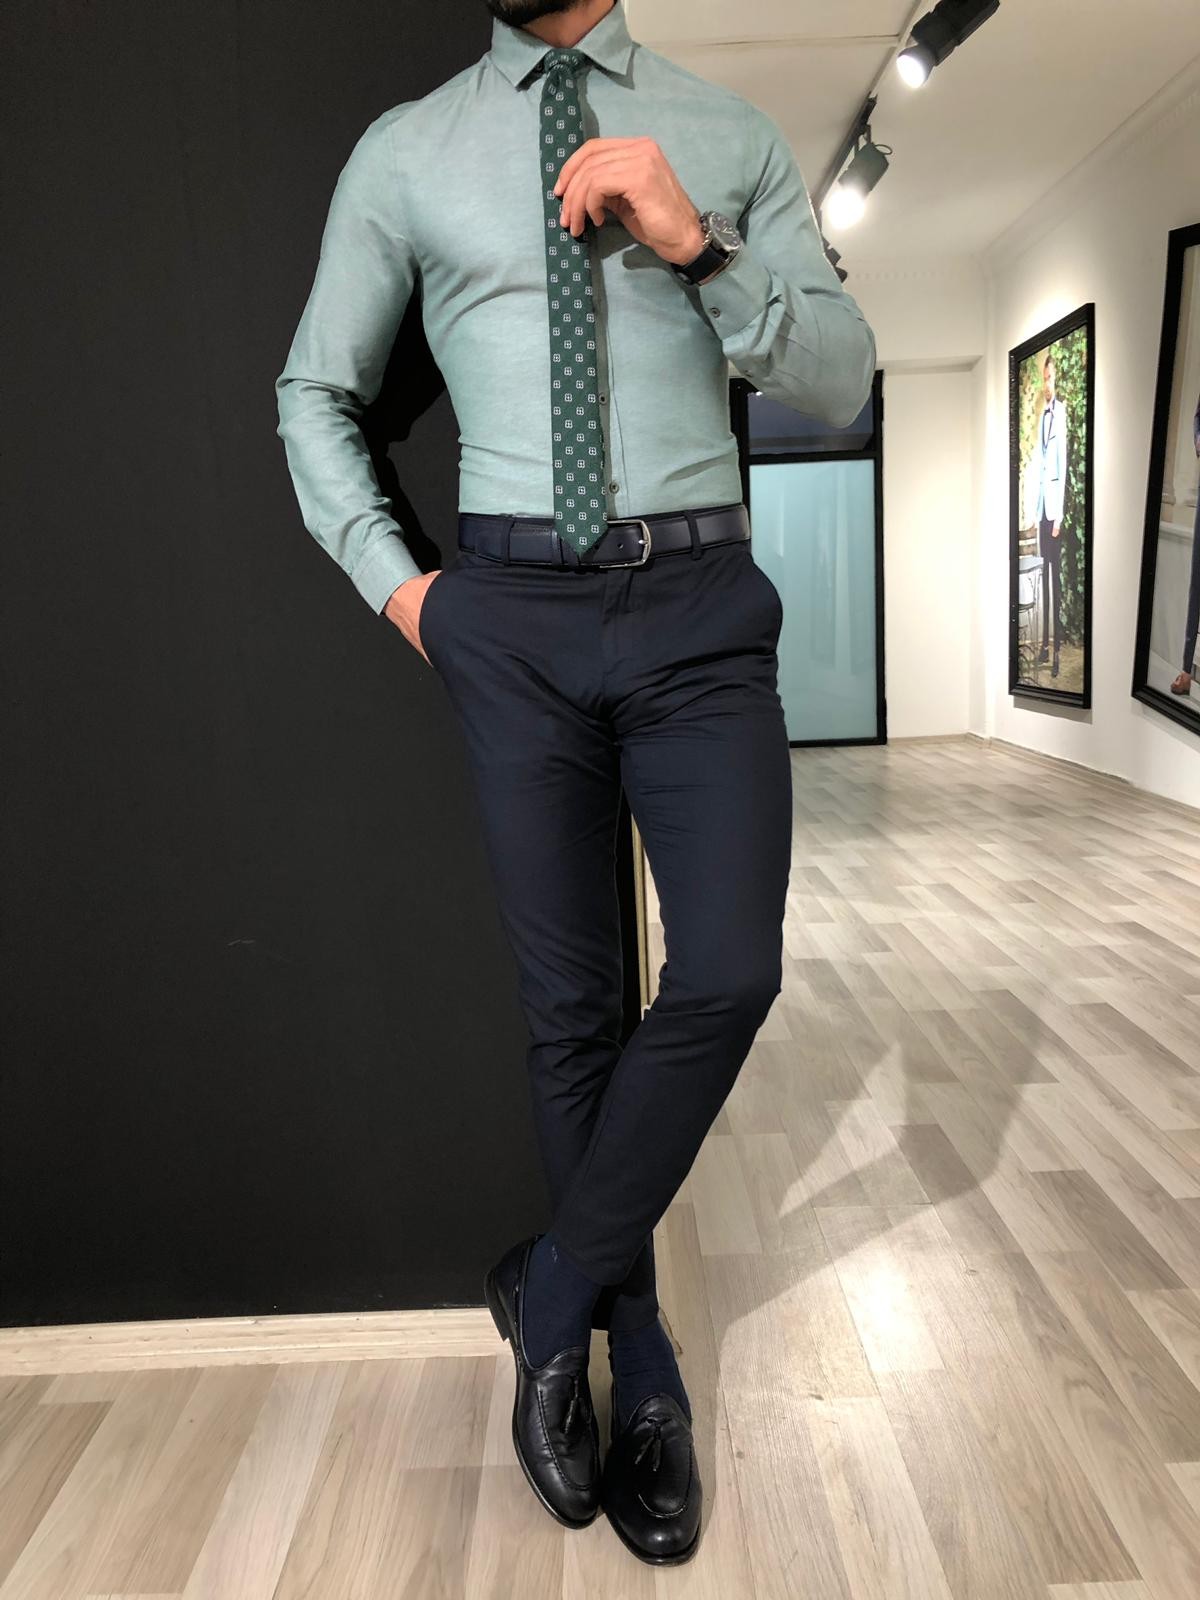 Buy Slim Fit Cotton Dress Shirt Green by Gentwith.com with Free Shipping